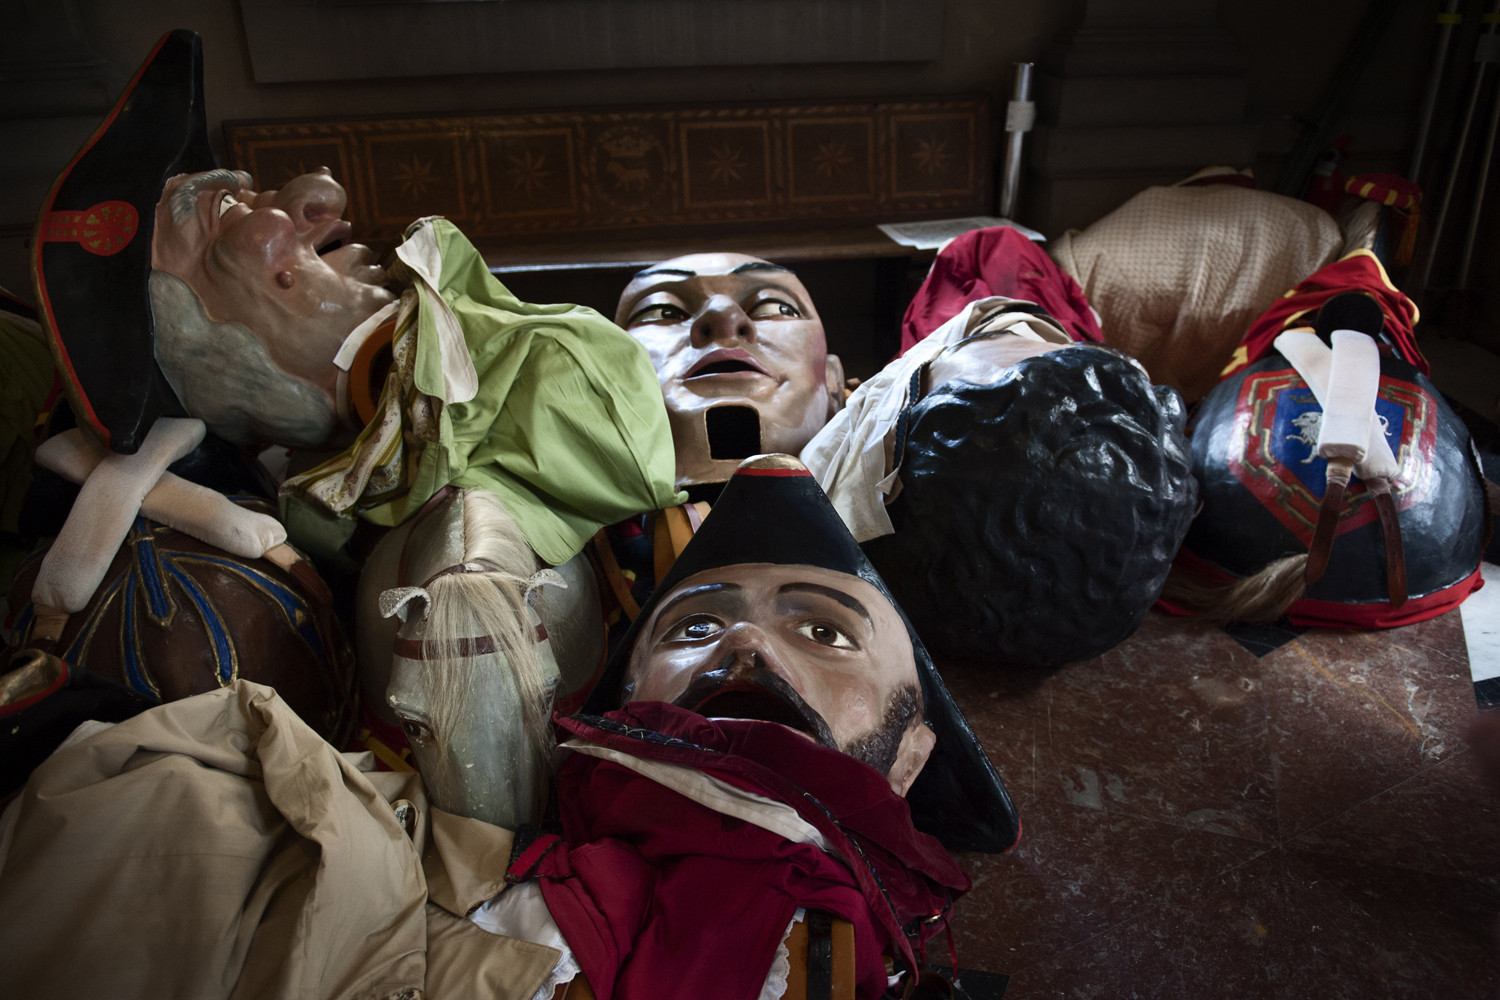 The Giants and Big Heads paraded during a farewell dance ceremony on the last day of the San Fermin festival in Pamplona, Spain on July 14, 2014.